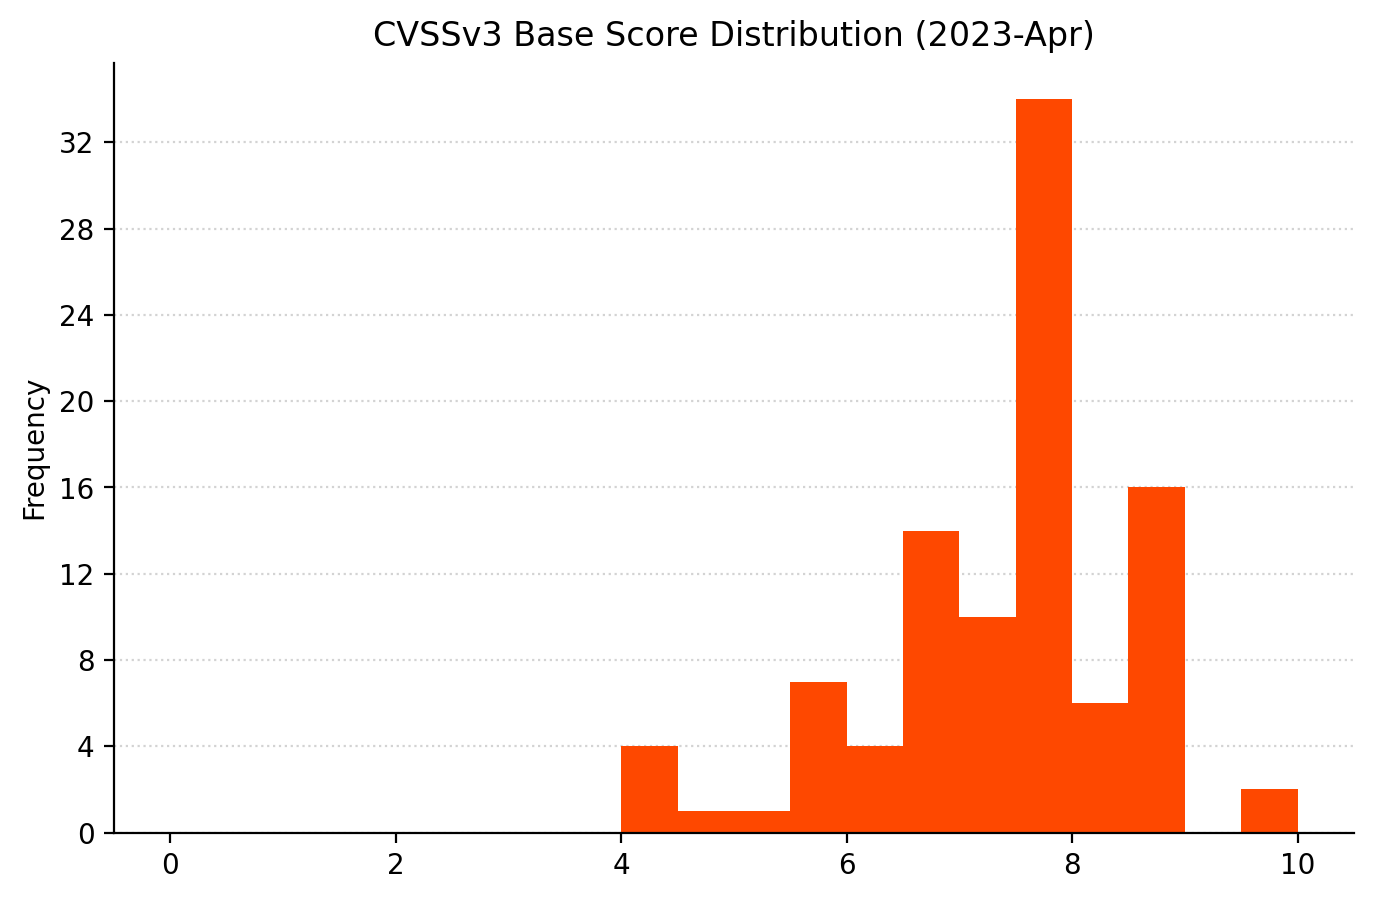 A bar chart showing vulnerability frequency by CVSSv3 Base Score for Microsoft Patch Tuesday April 2023. Most vulnerabilities are scored in the 6.0-9.0 range, with a few outliers.